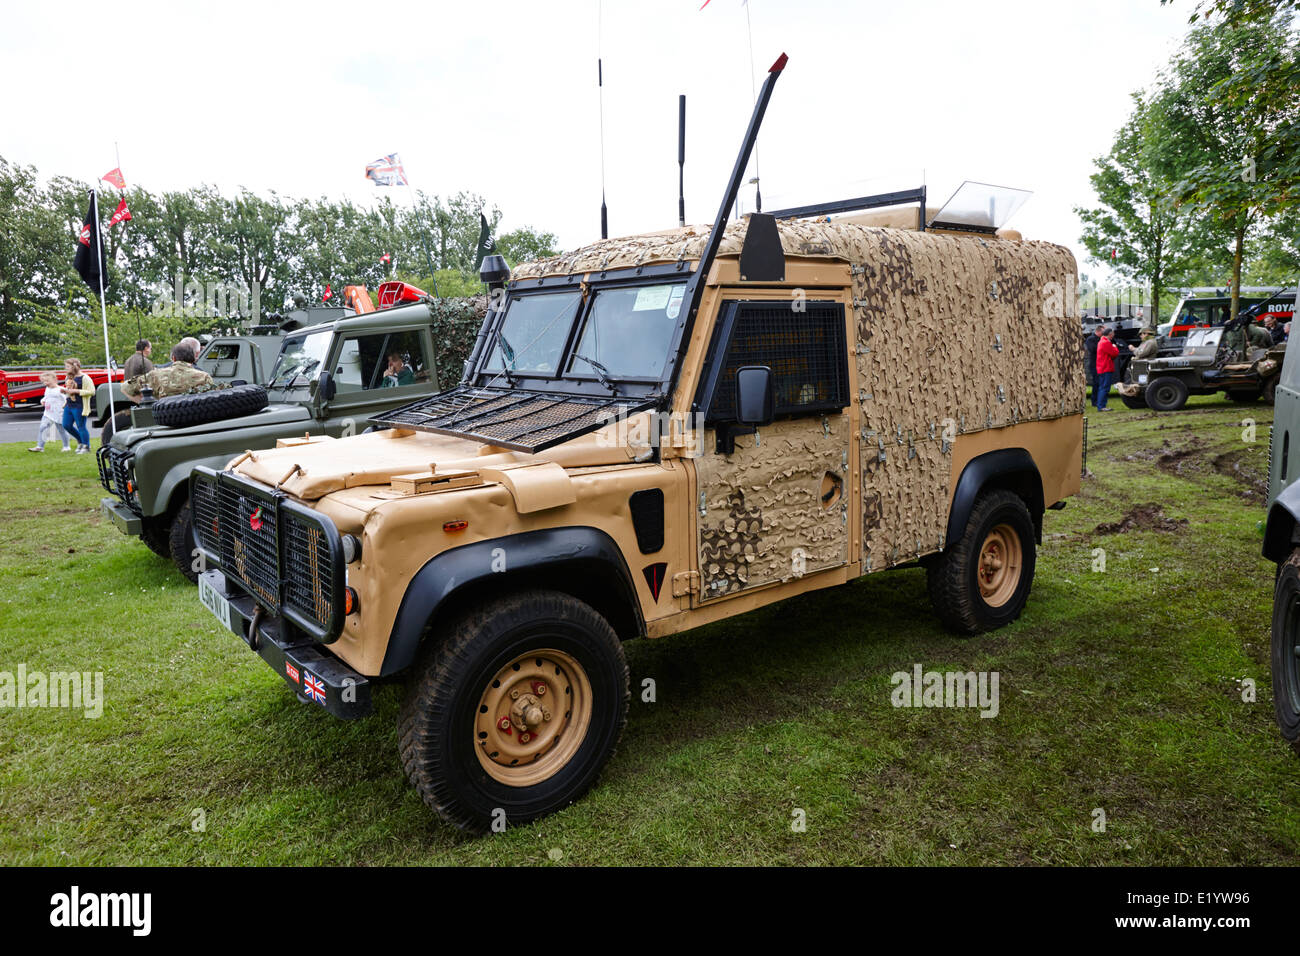 british army snatch landrover in desert colour pattern at military vehicle display bangor northern ireland Stock Photo